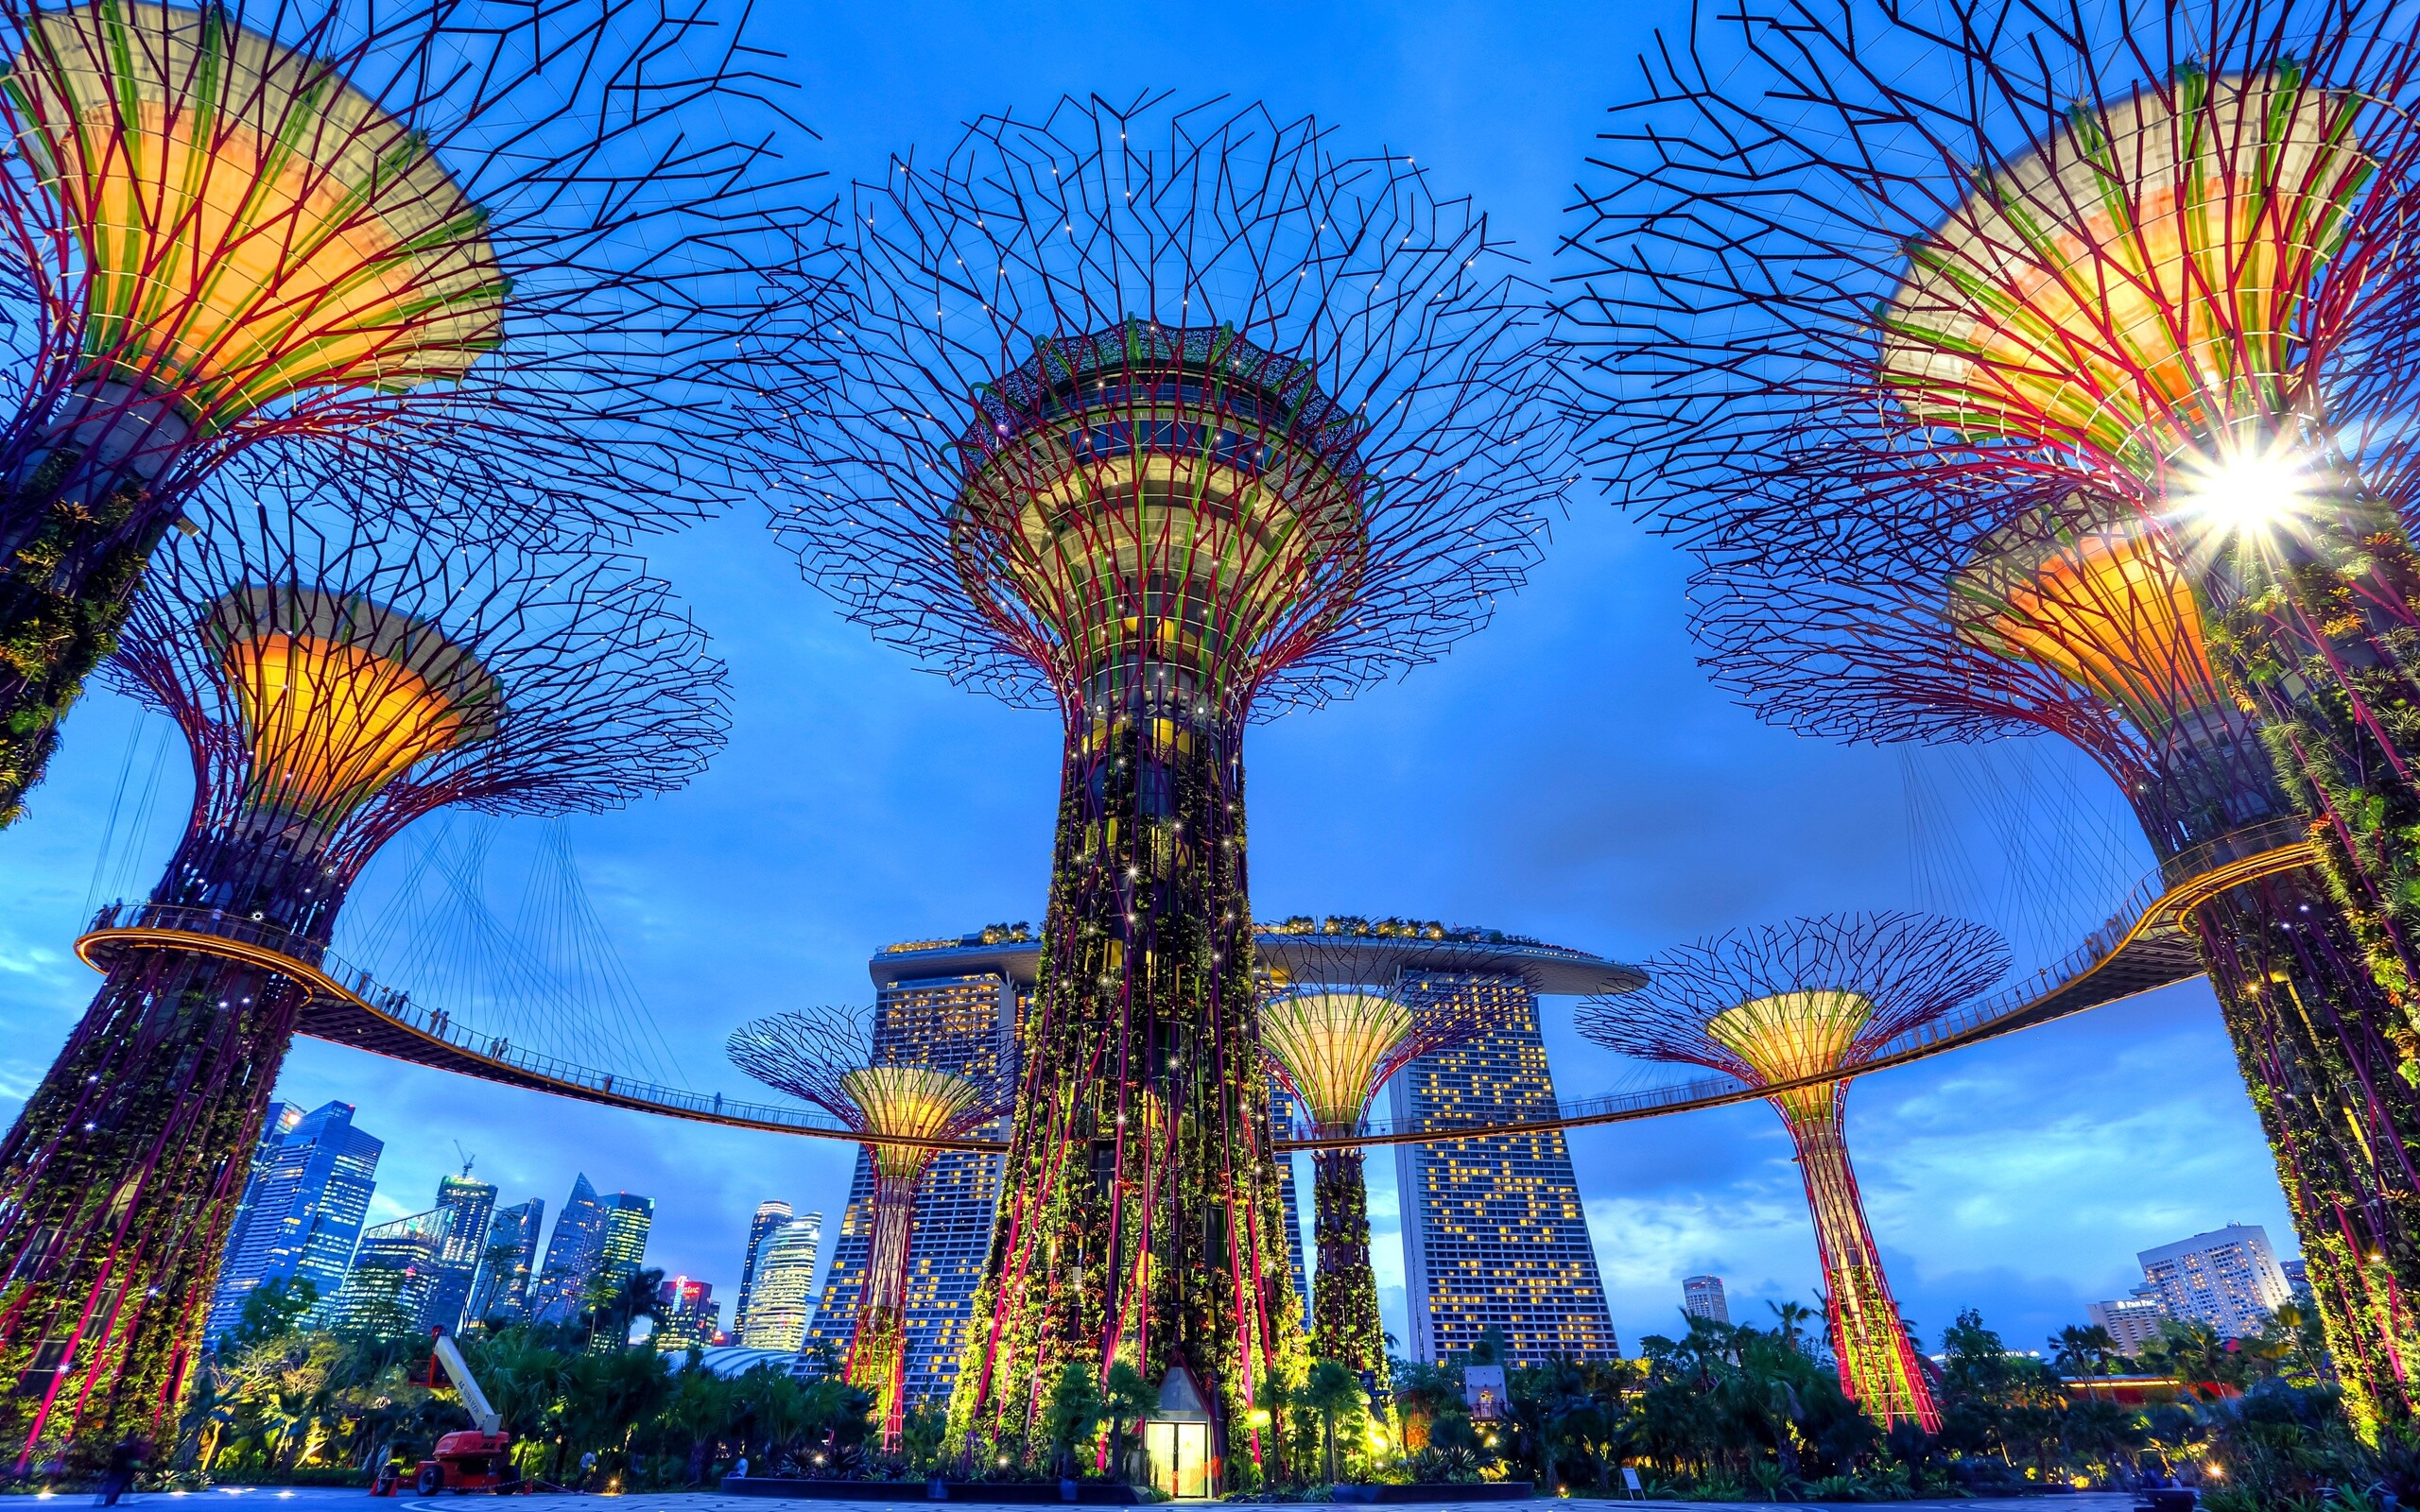 Singapore: Supertree Grove, The man-made mechanical forest, 18 supertrees that act as vertical gardens. 2560x1600 HD Background.